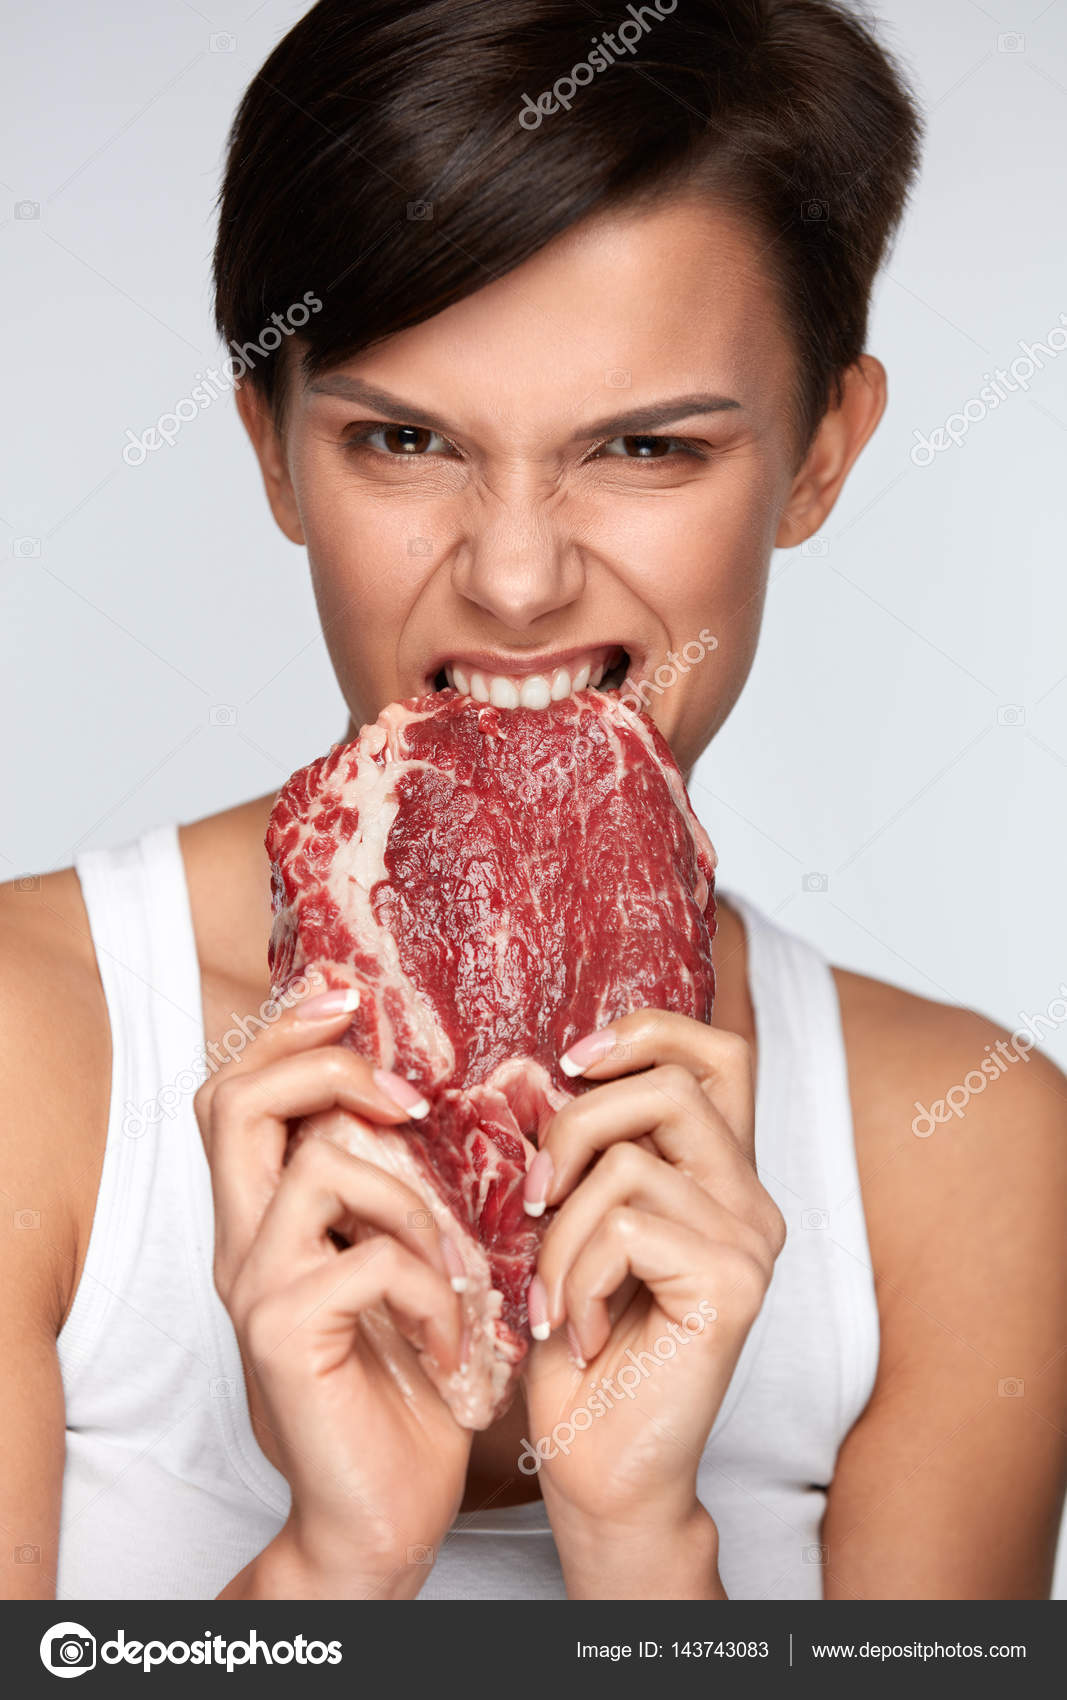 Eating Meat Beautiful Woman Biting Raw Red Beef Meat With